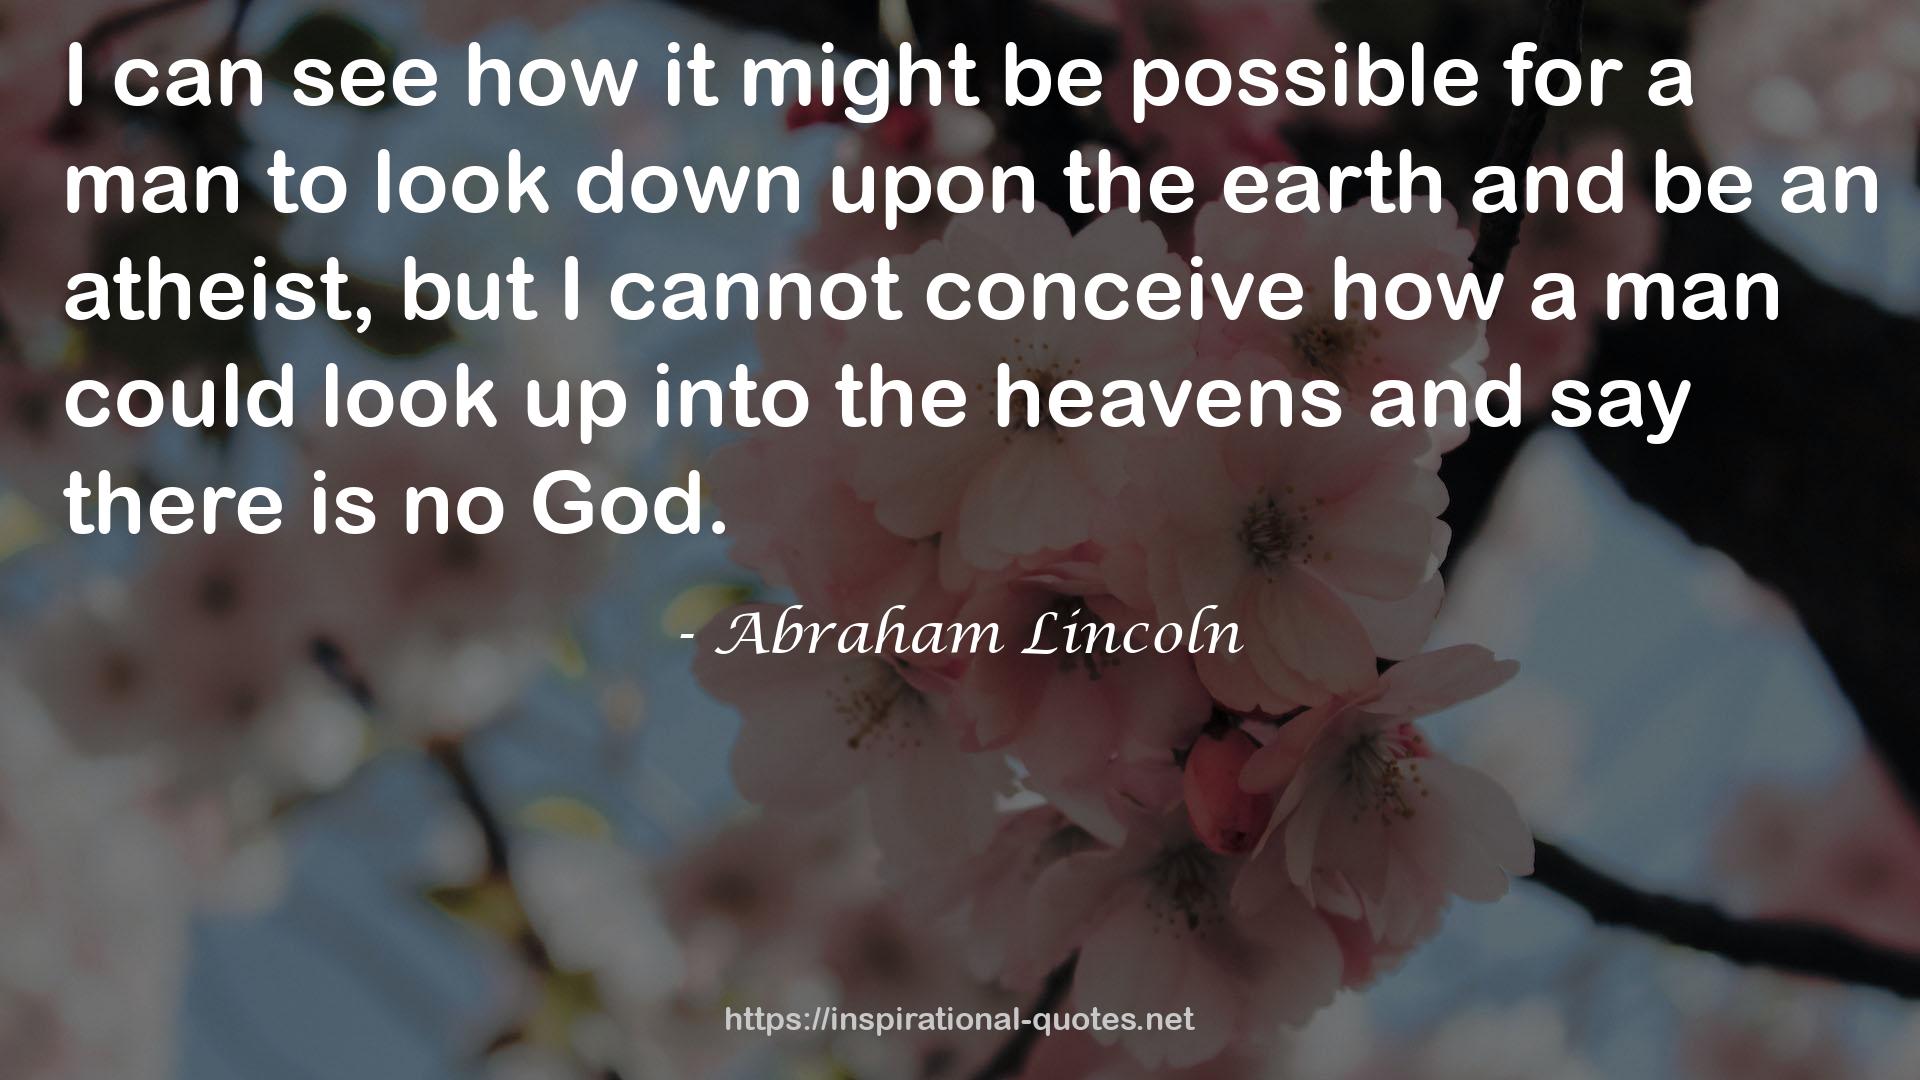 Abraham Lincoln QUOTES